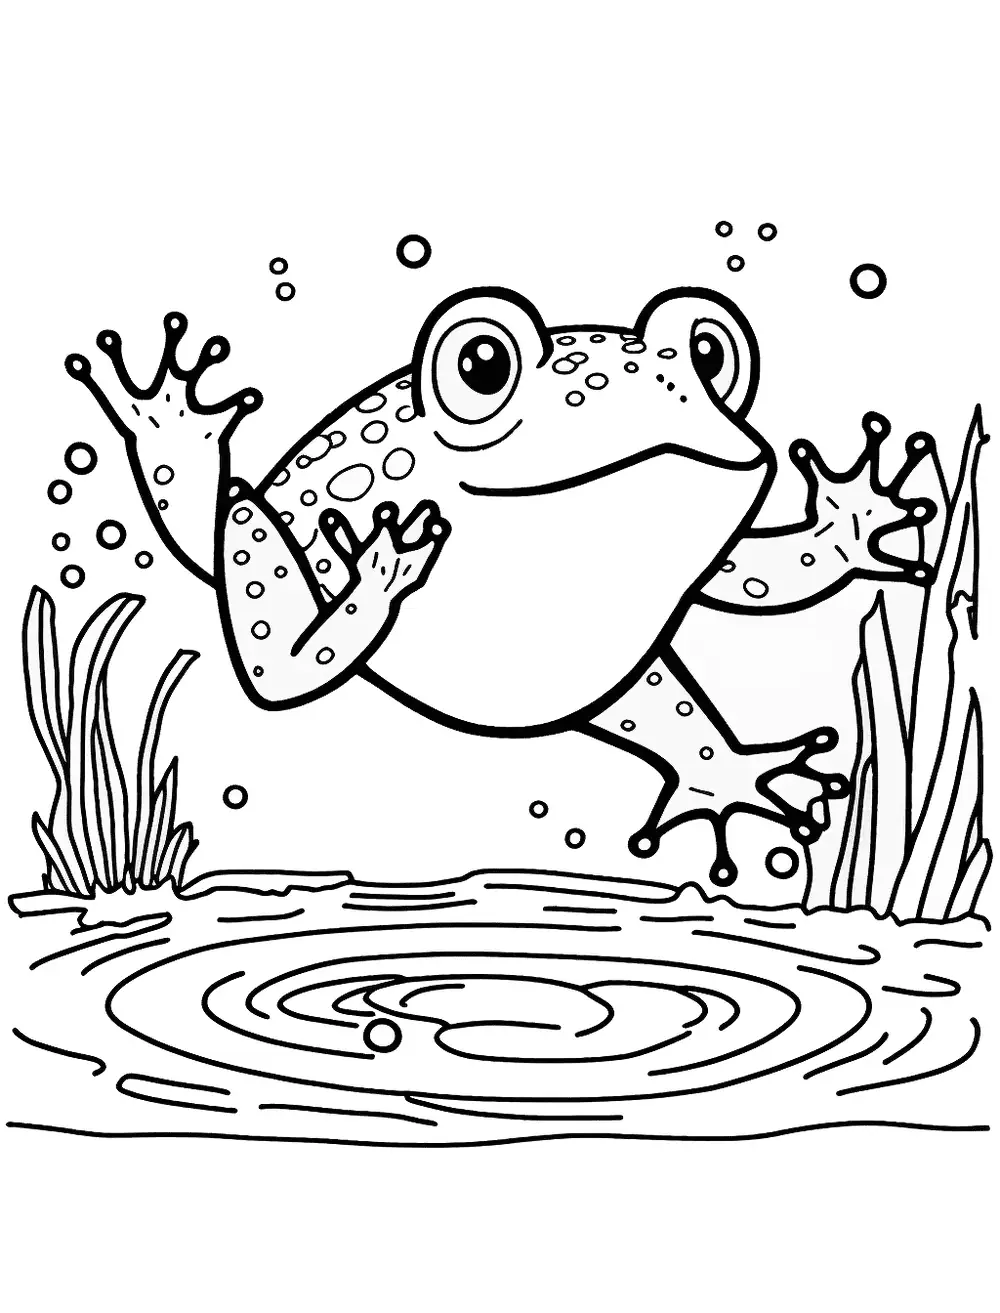 Frog Jumping Into A Pond Coloring Page - A frog, in mid-jump, diving into a pond with a big splash